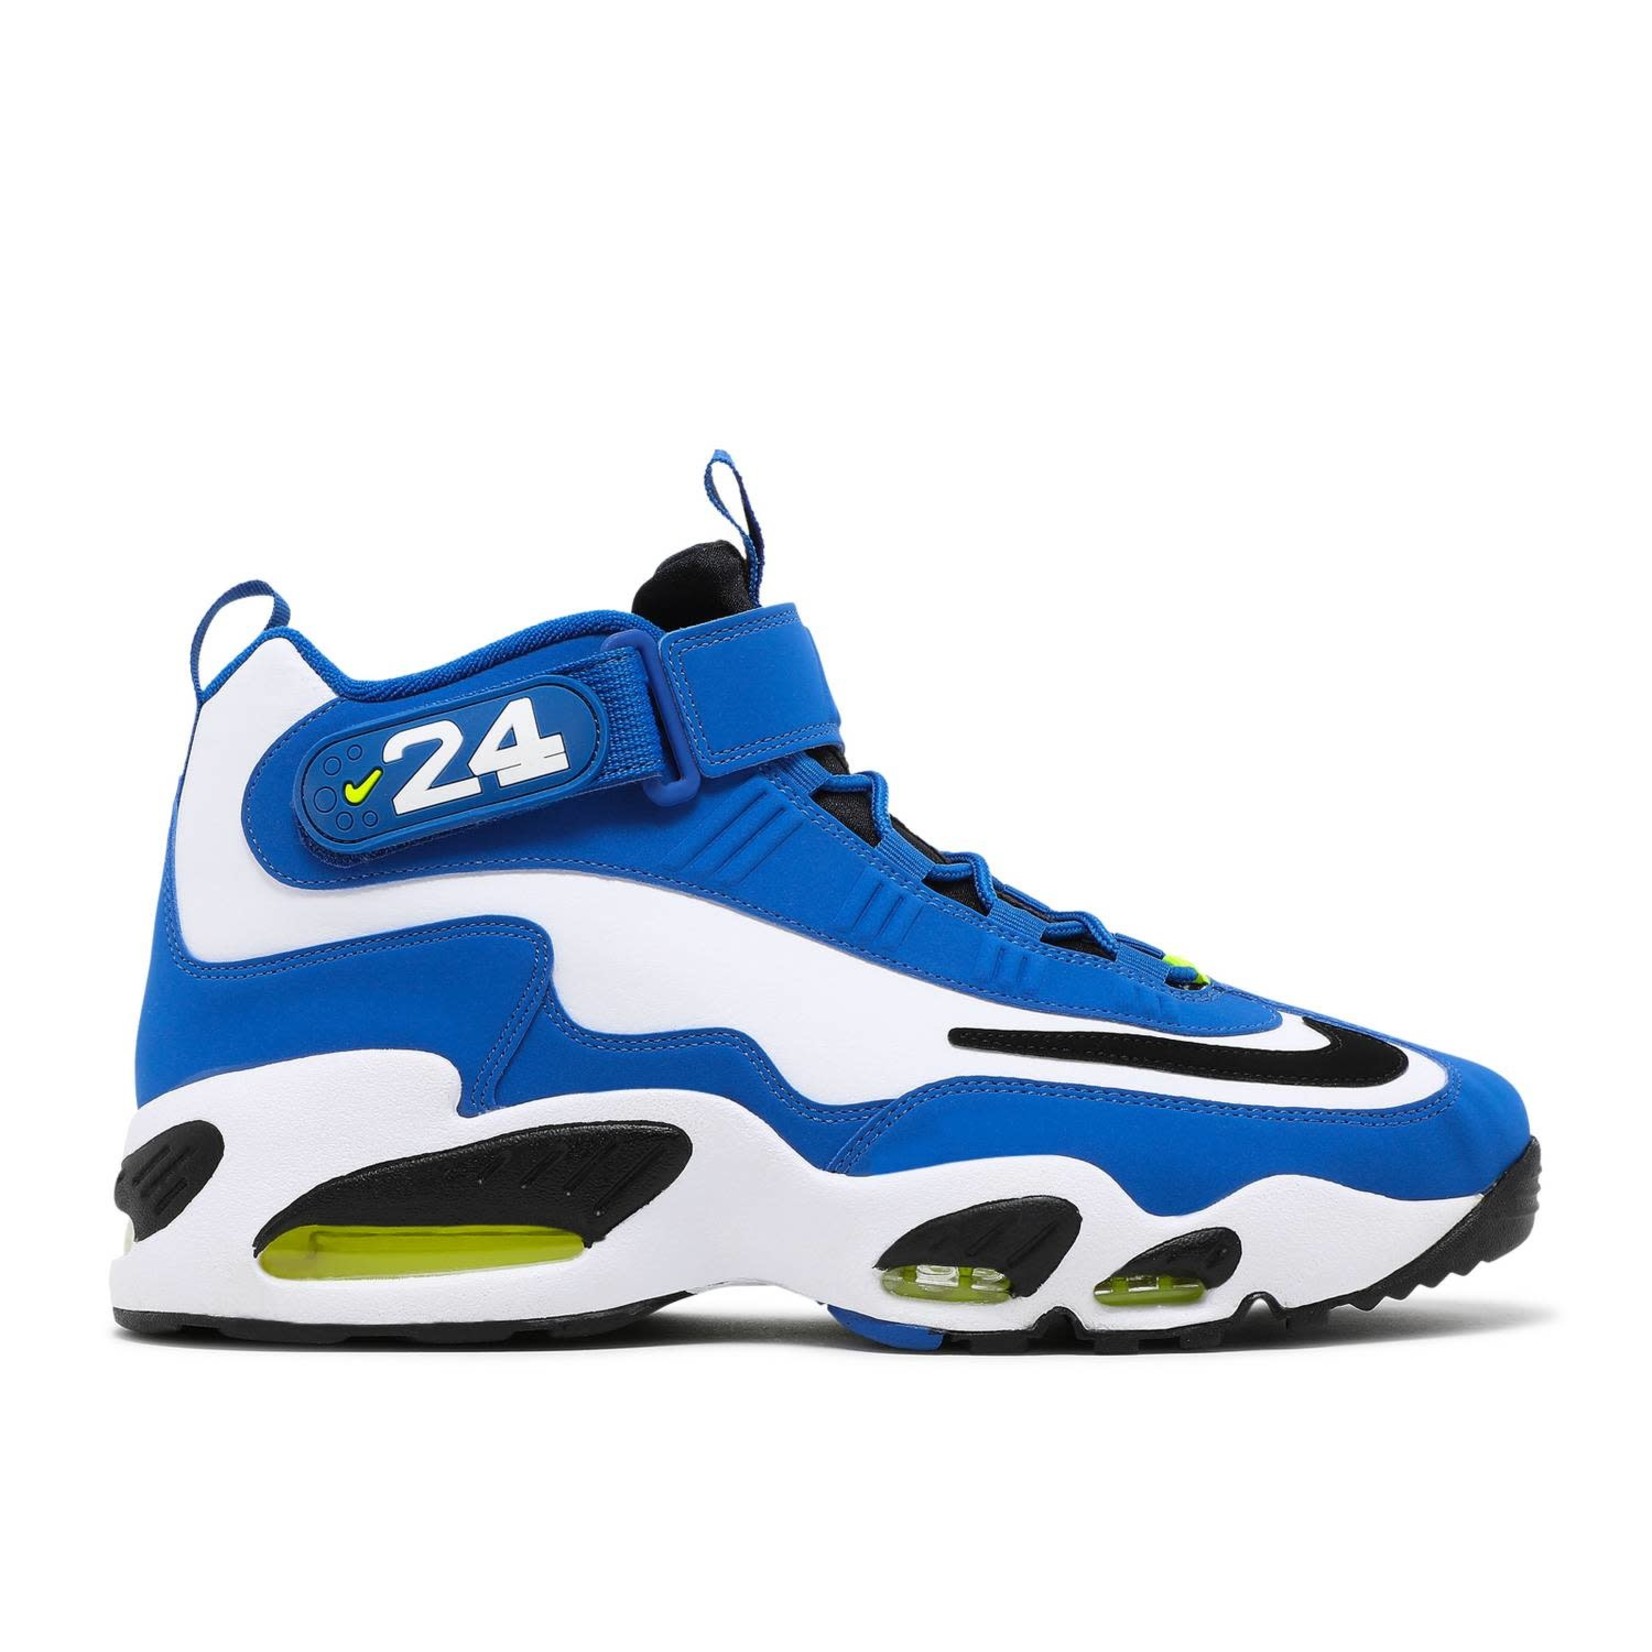 Nike Nike Air Griffey Max 1 Varsity Royal (2021) Size 8, DS BRAND NEW